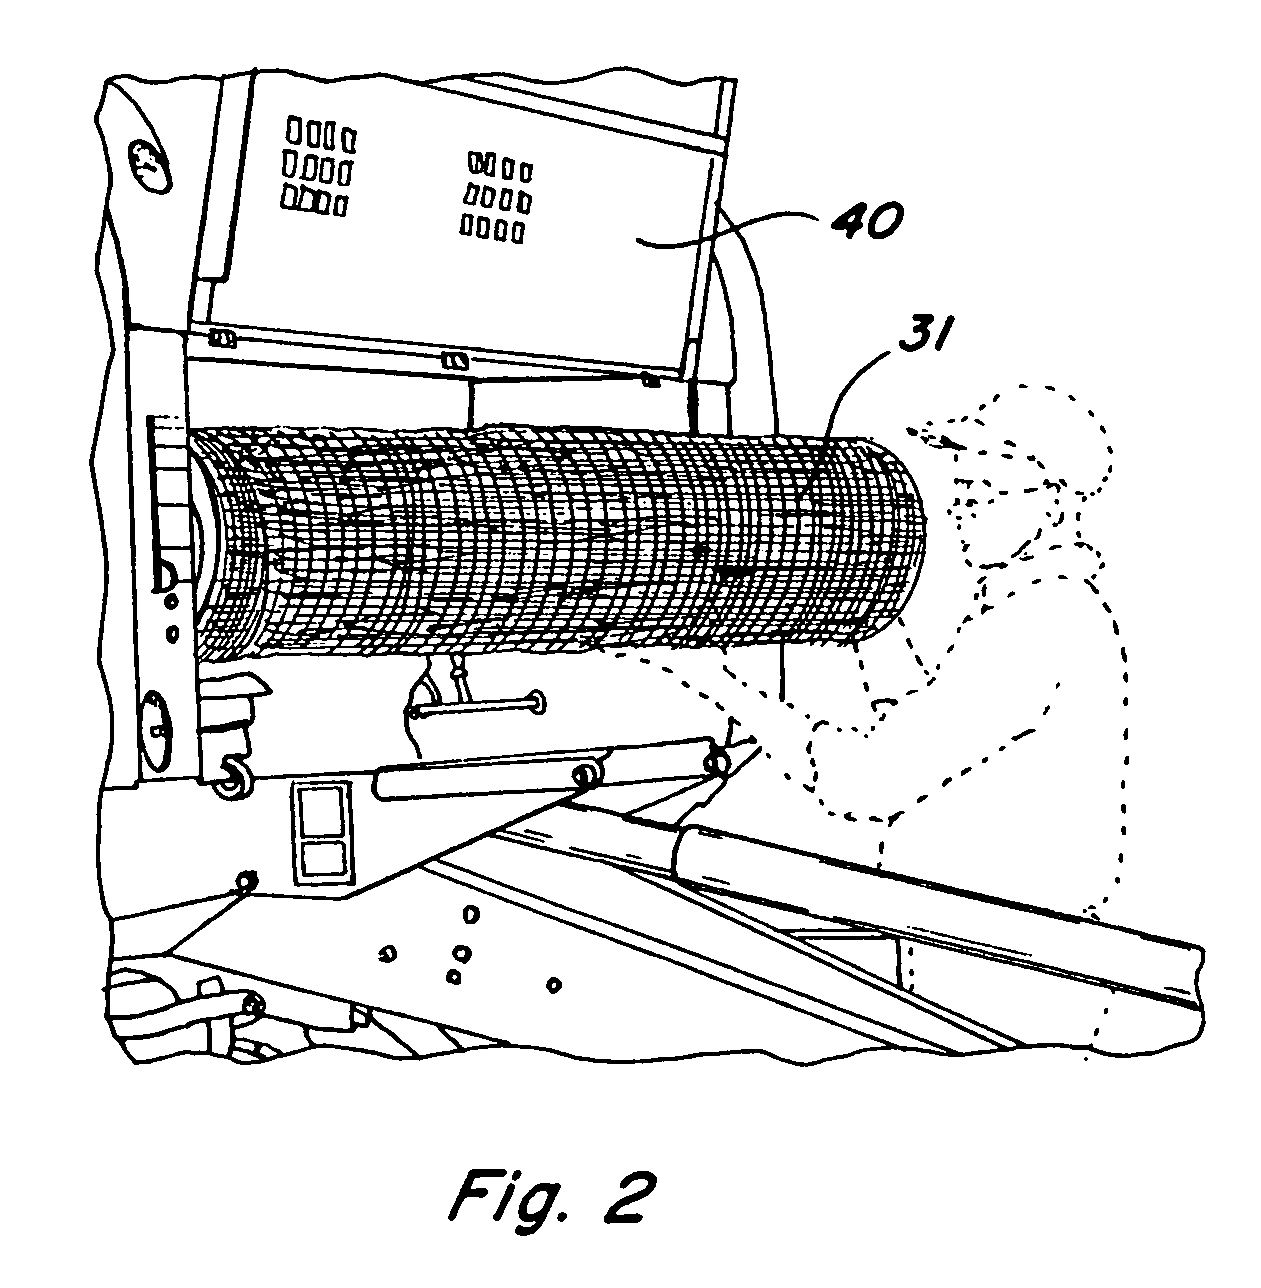 Computer controlled automatic wrapping material dispensing system for a round baler